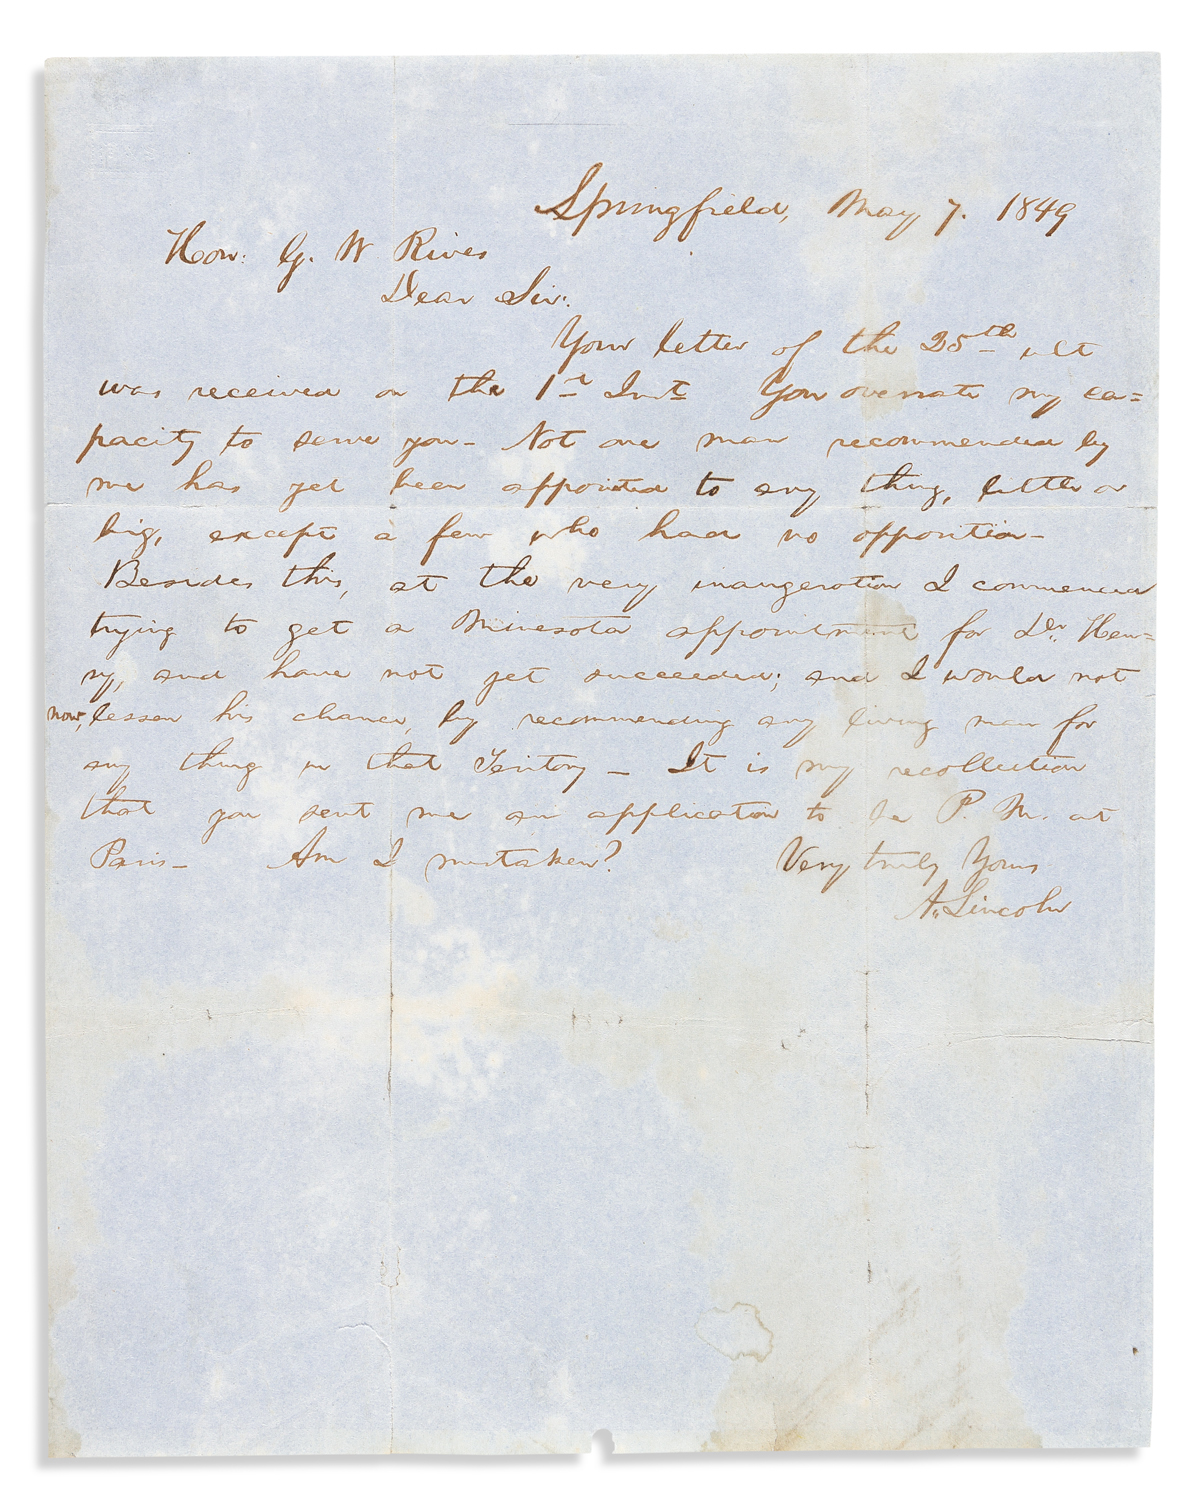 LINCOLN, ABRAHAM. Autograph Letter Signed, A.Lincoln, to Whig activist George W. Rives (Hon: G.W. Rives),